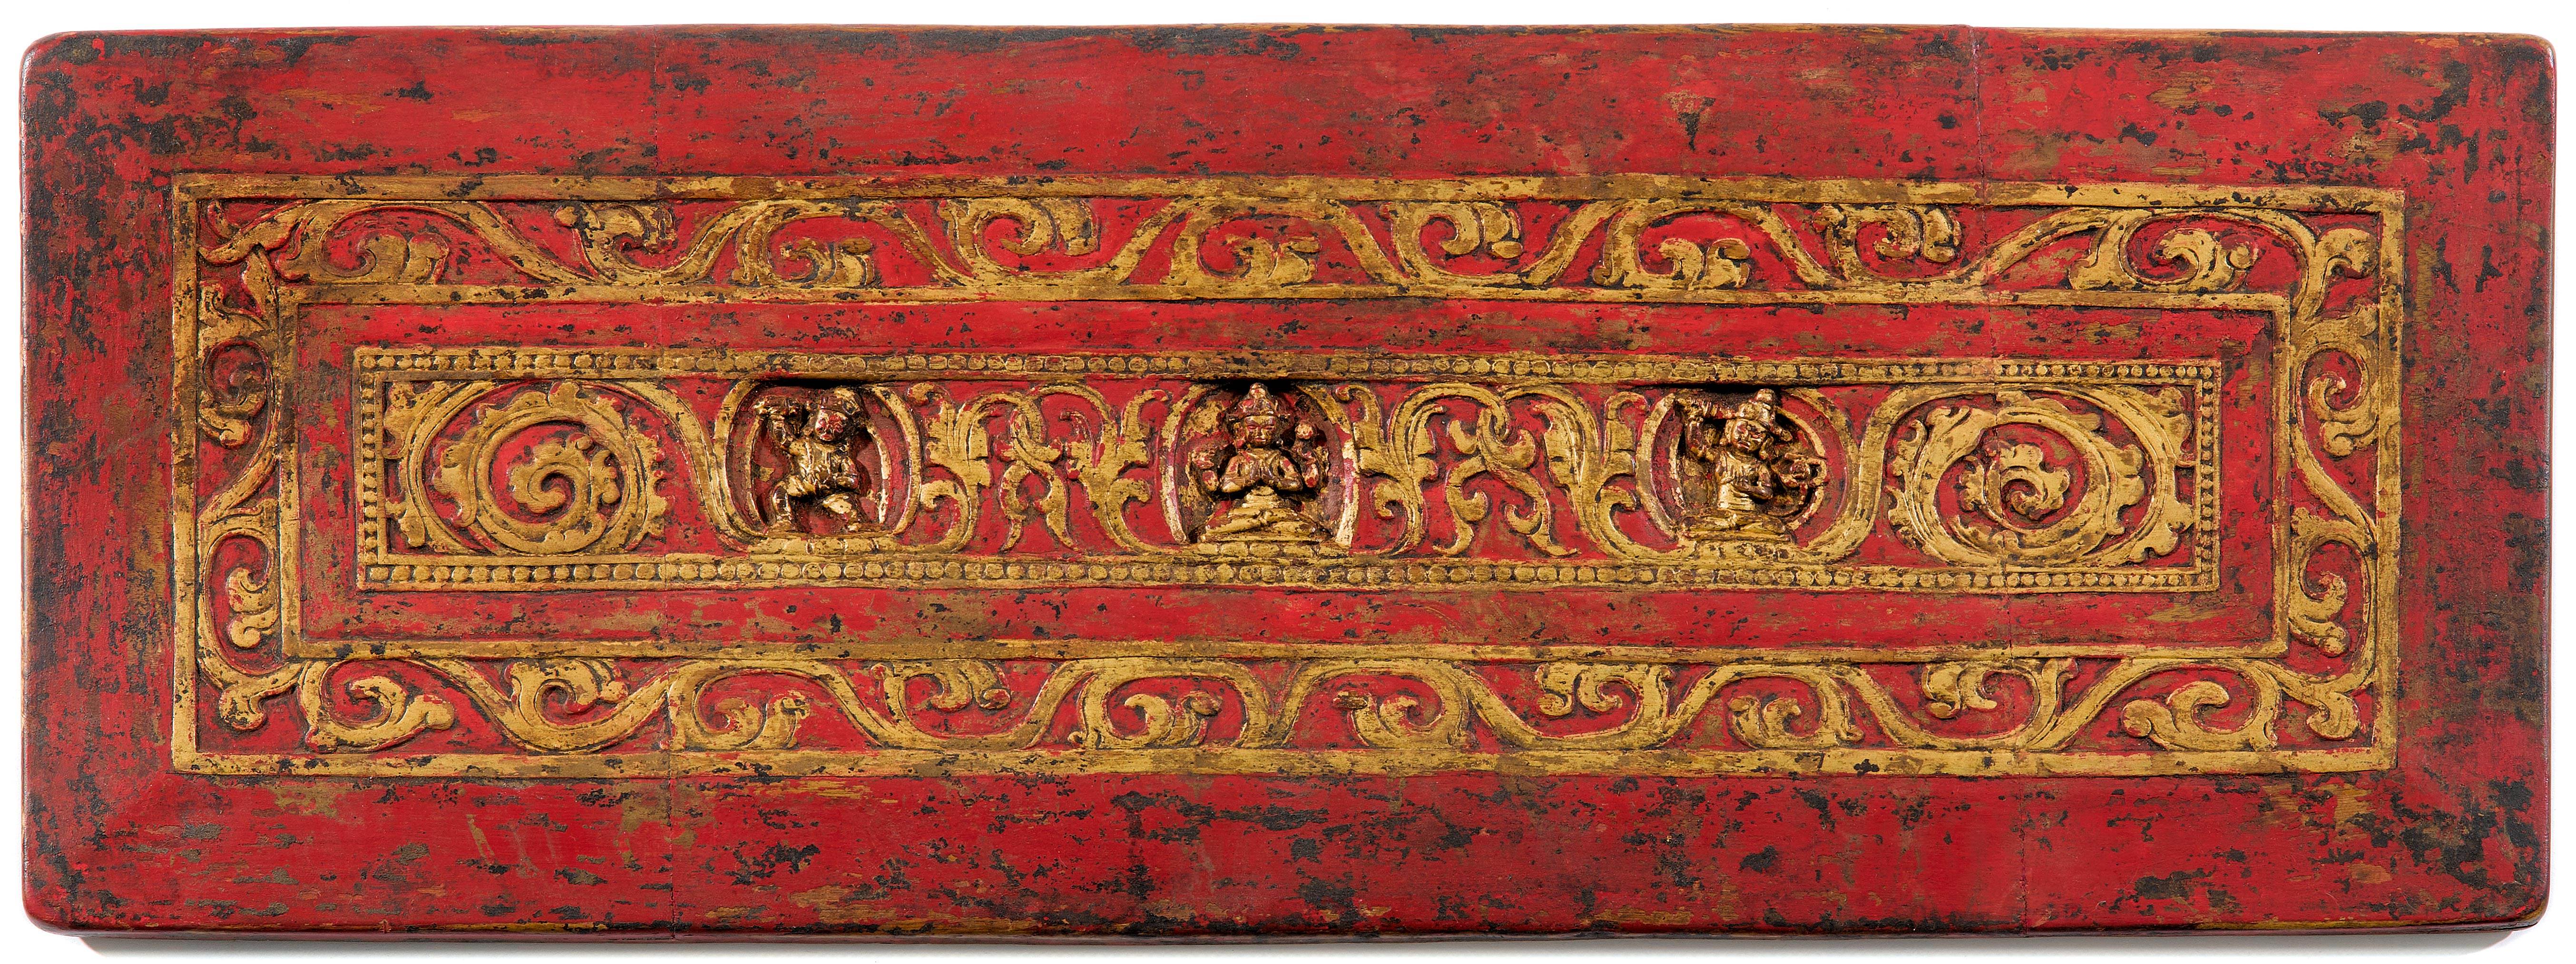 A RED AND GOLD PAINTED MANUSCRIPT COVER.